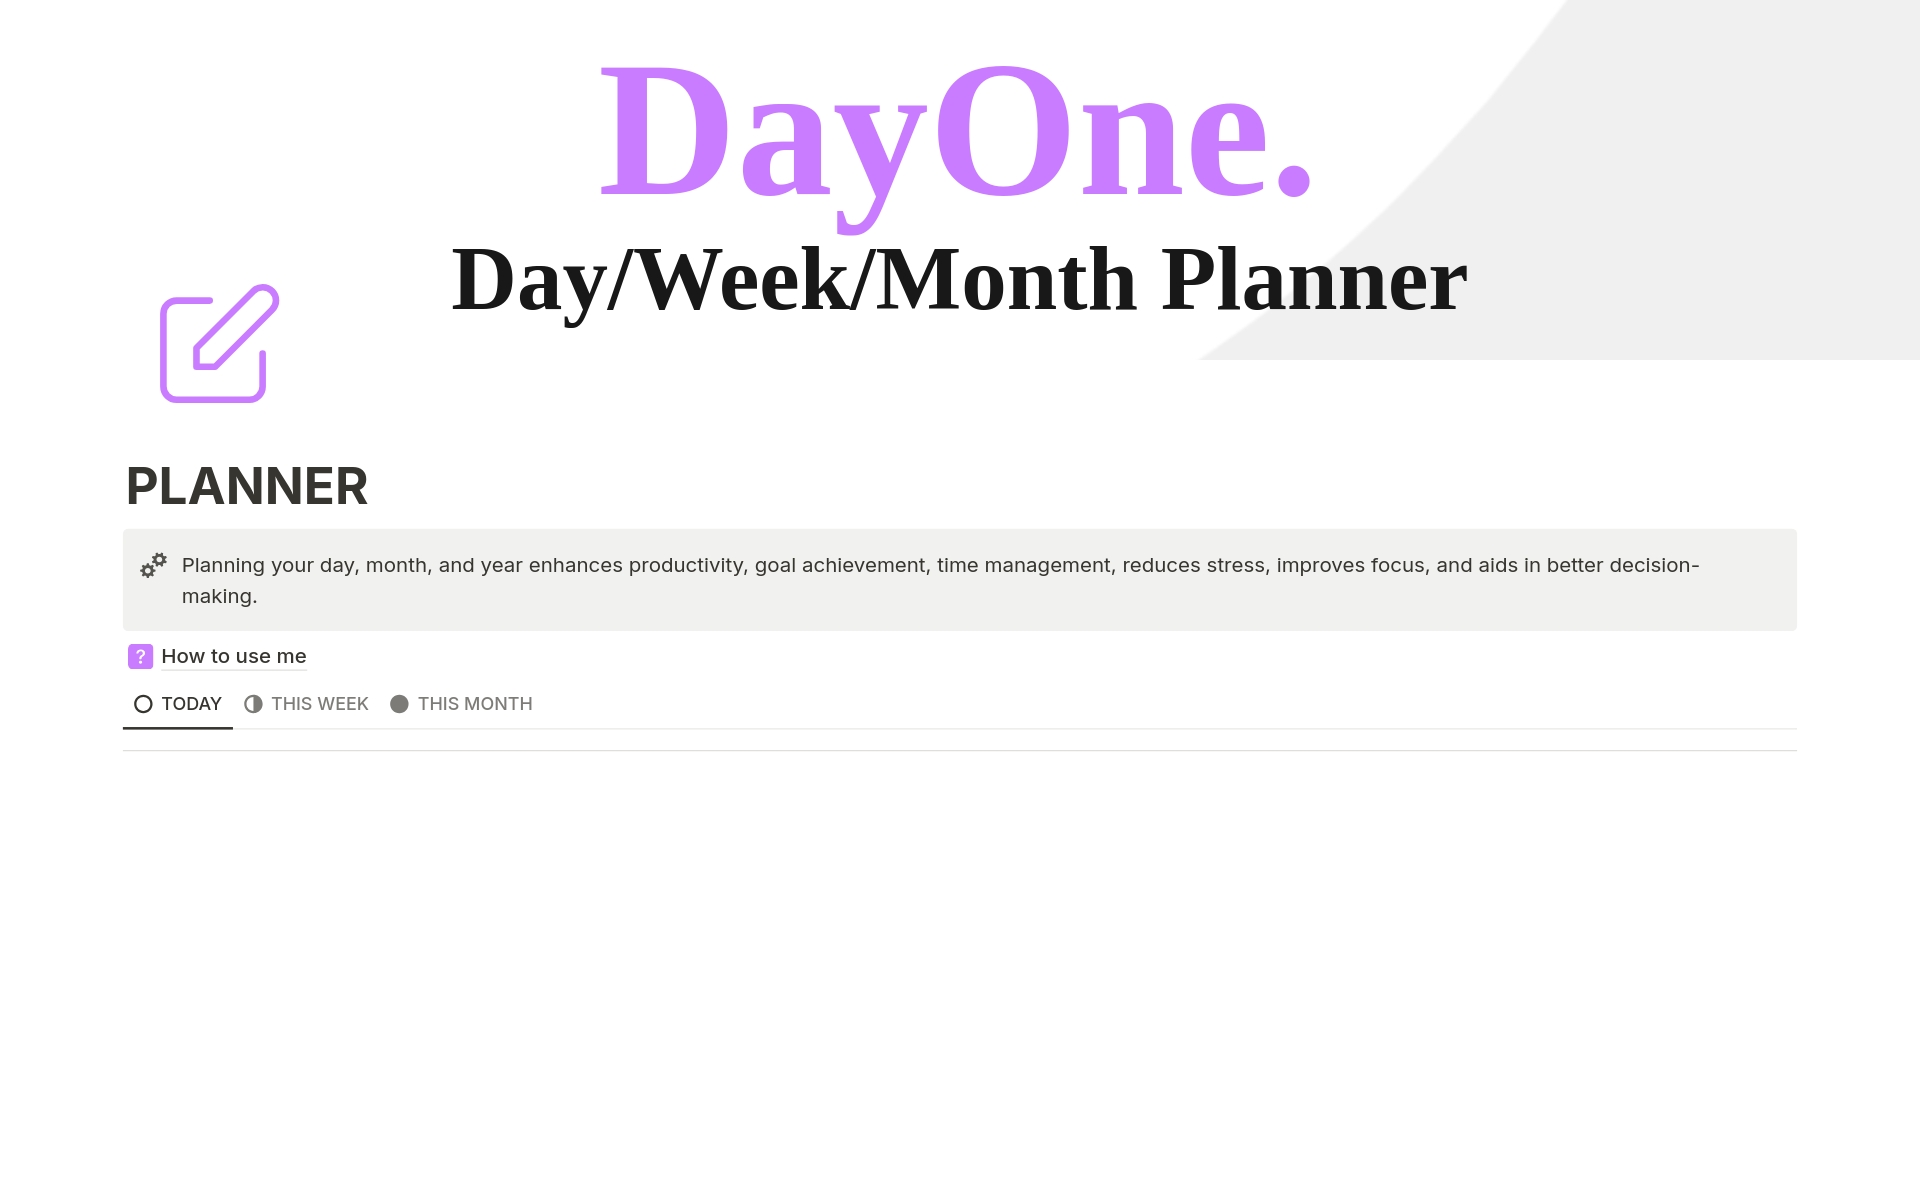 📅Ready to Finally Start Optimising your Time?

A Professinal Planning Template Optimised to combine Day, Week & Month Scheduling into an All-In-One Ultimate Planning System.